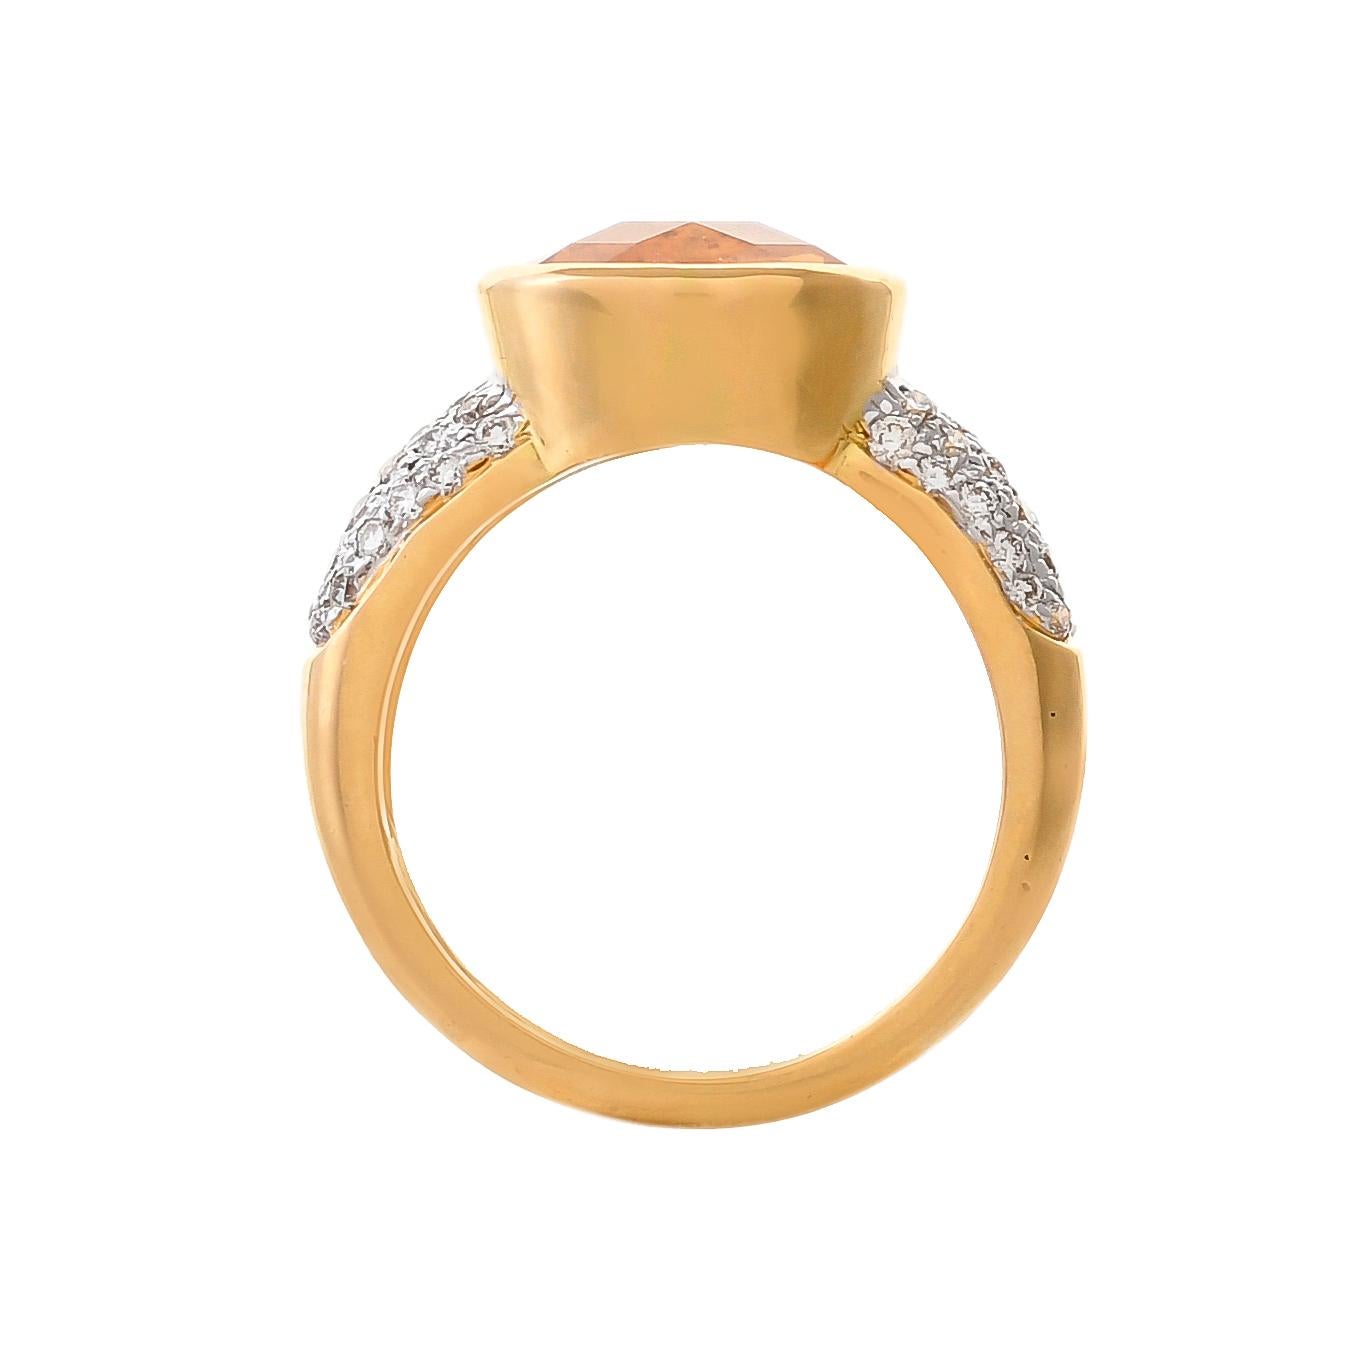 Design to encourage love this beautiful ring features oval-shaped citrine weighing approximately 2.92 carats, inserted within a yellow gold bezel on a tapering band of 18 karats yellow gold pave set with round diamonds weighing approximately 0.44